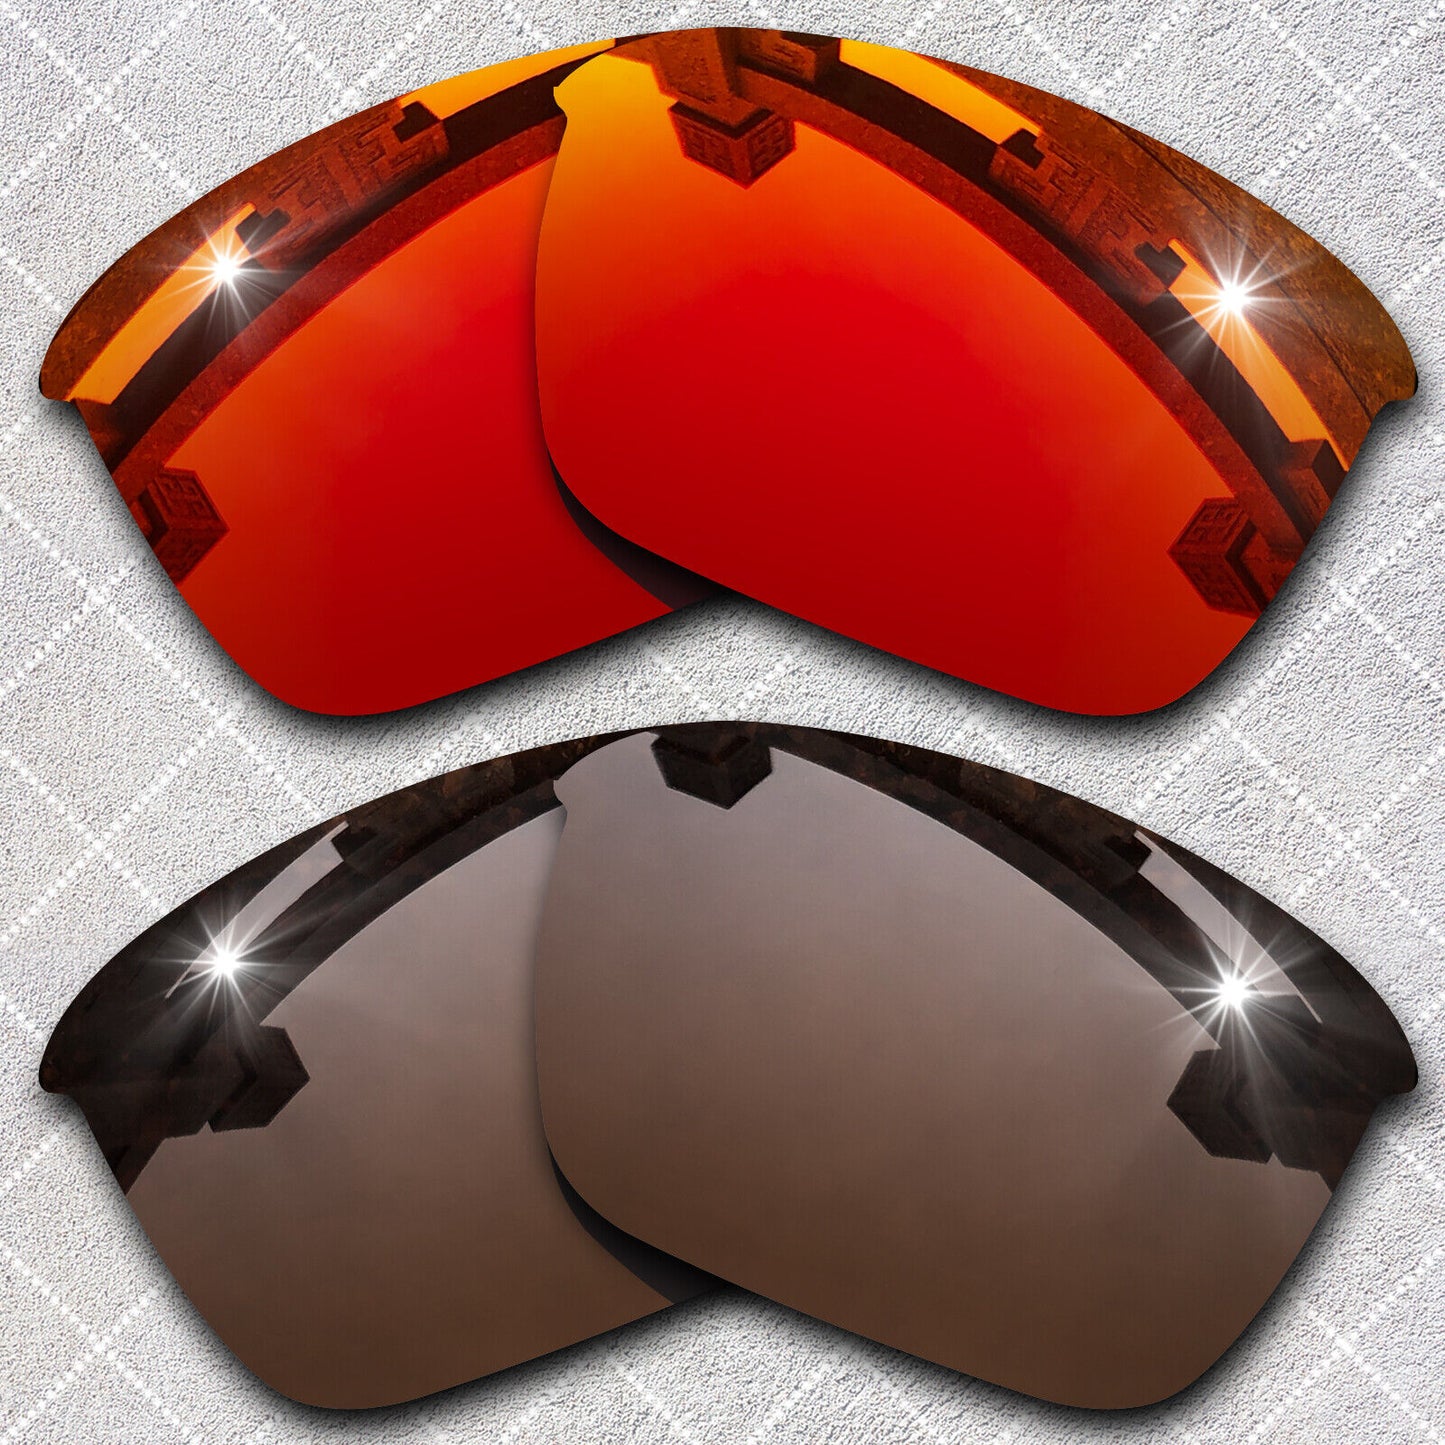 HeyRay Replacement Lenses for Valve Sunglasses Polarized - Opt